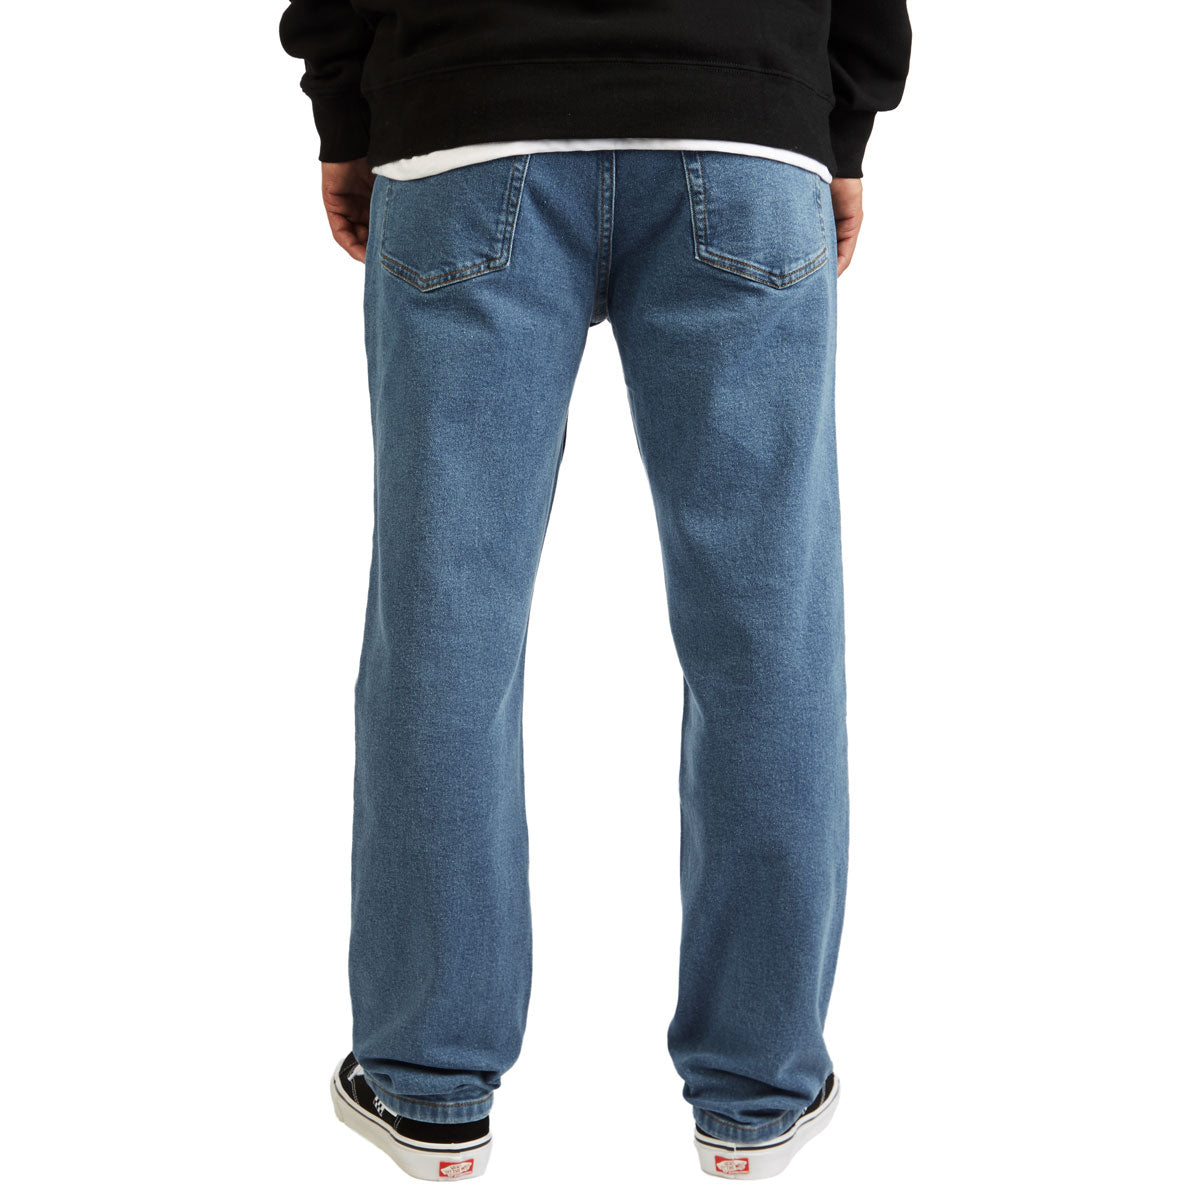 CCS 12oz Stretch Relaxed Denim Jeans - 12oz Rinse image 3